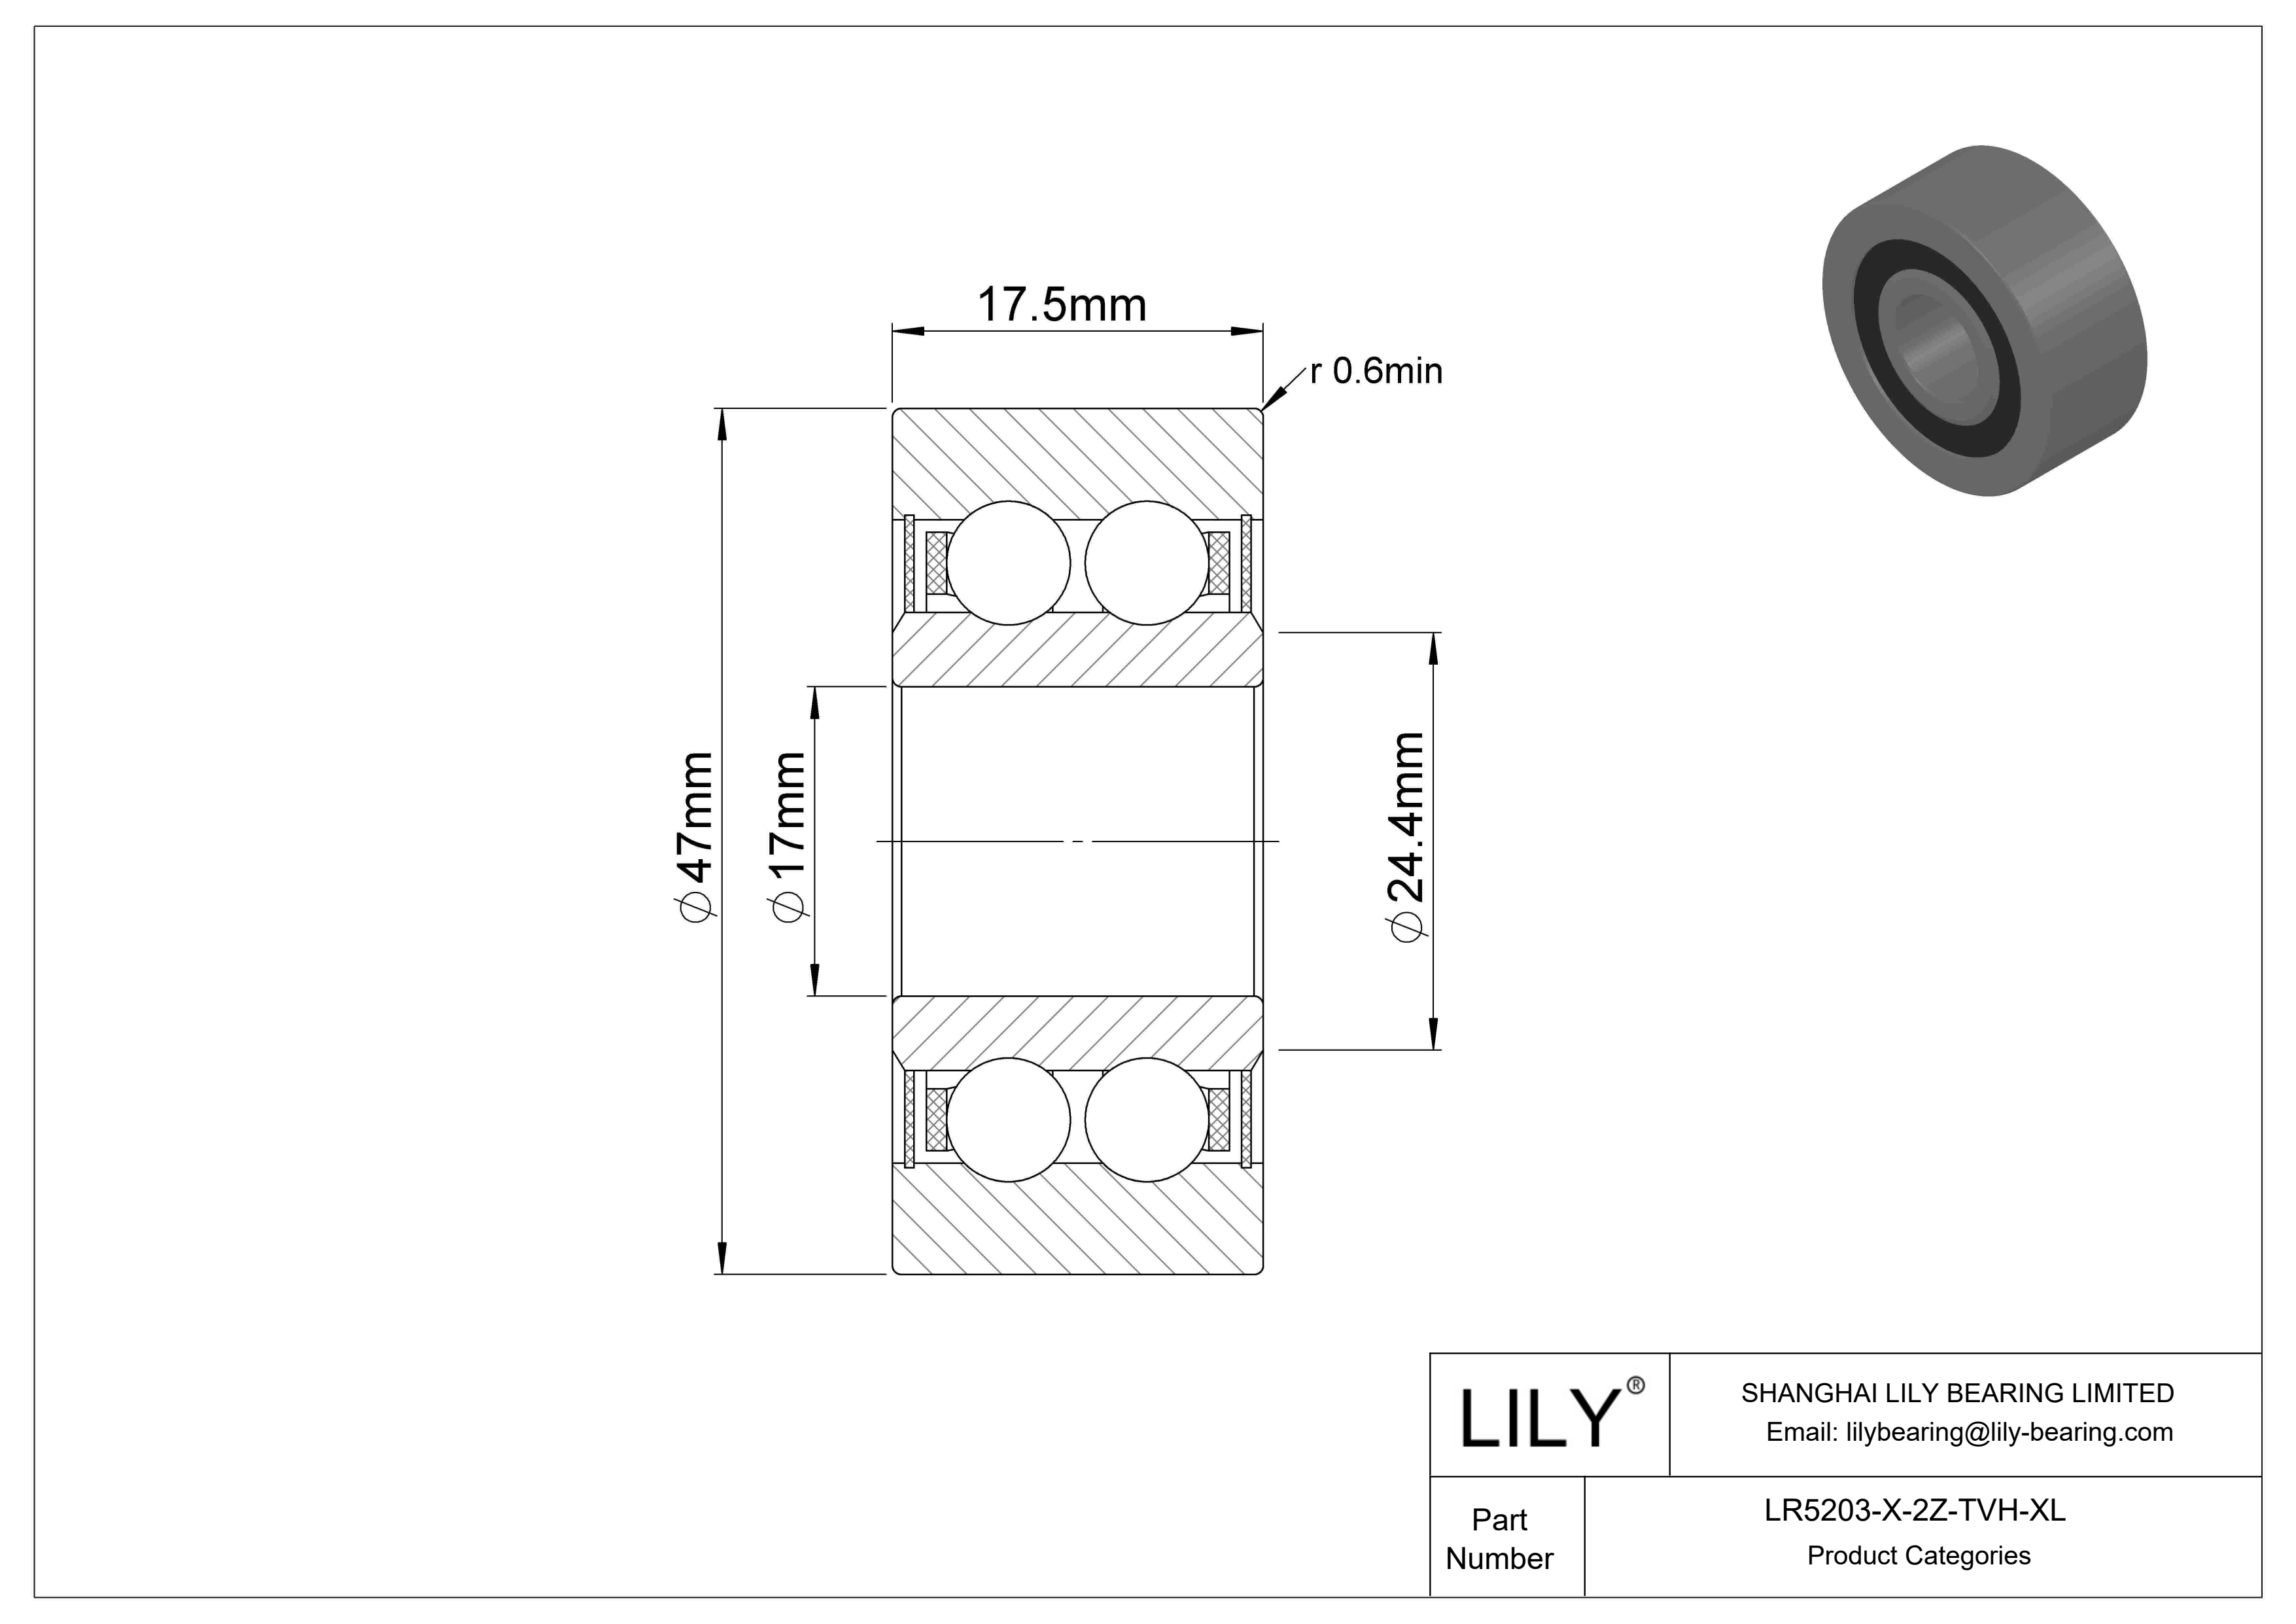 LR5203-X-2Z-TVH-XL Yoke Type Track Rollers cad drawing